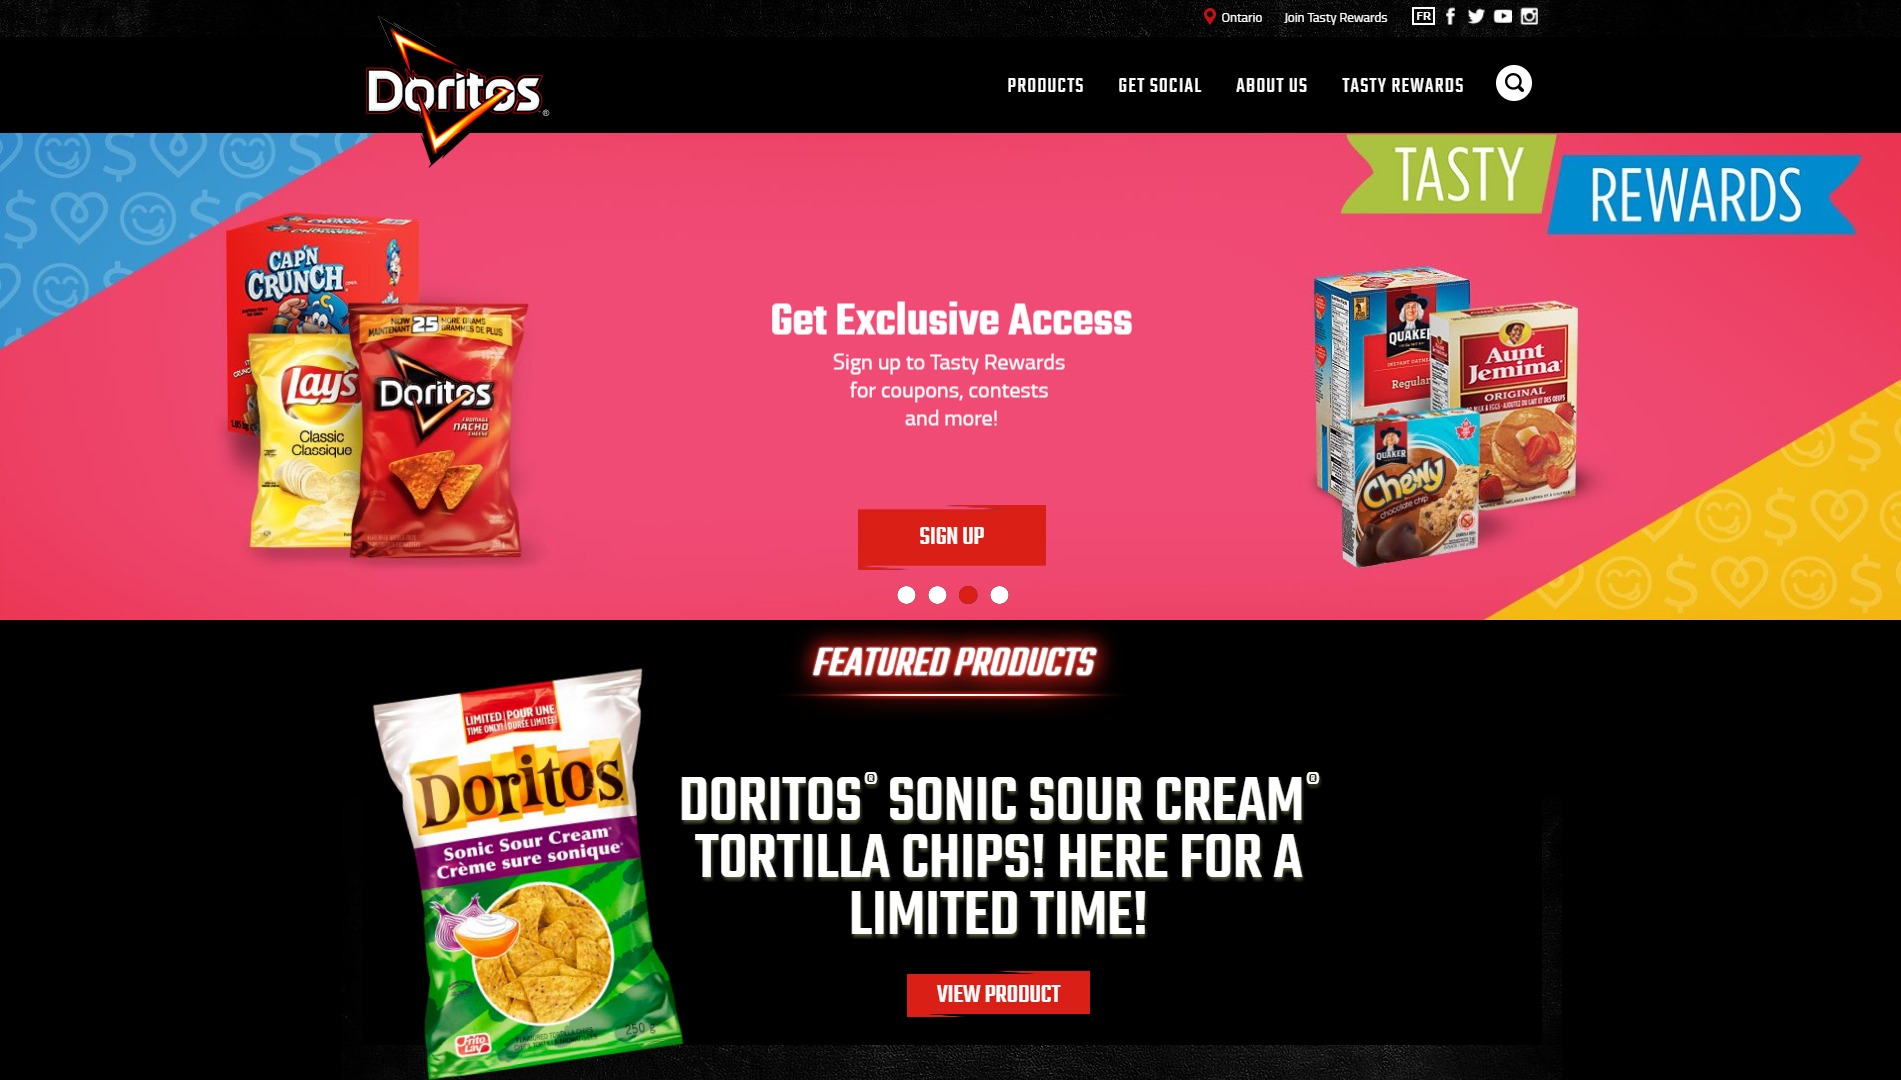 You actually cannot miss Tasty Rewards if you go to the Doritos Canada brand’s homepage.